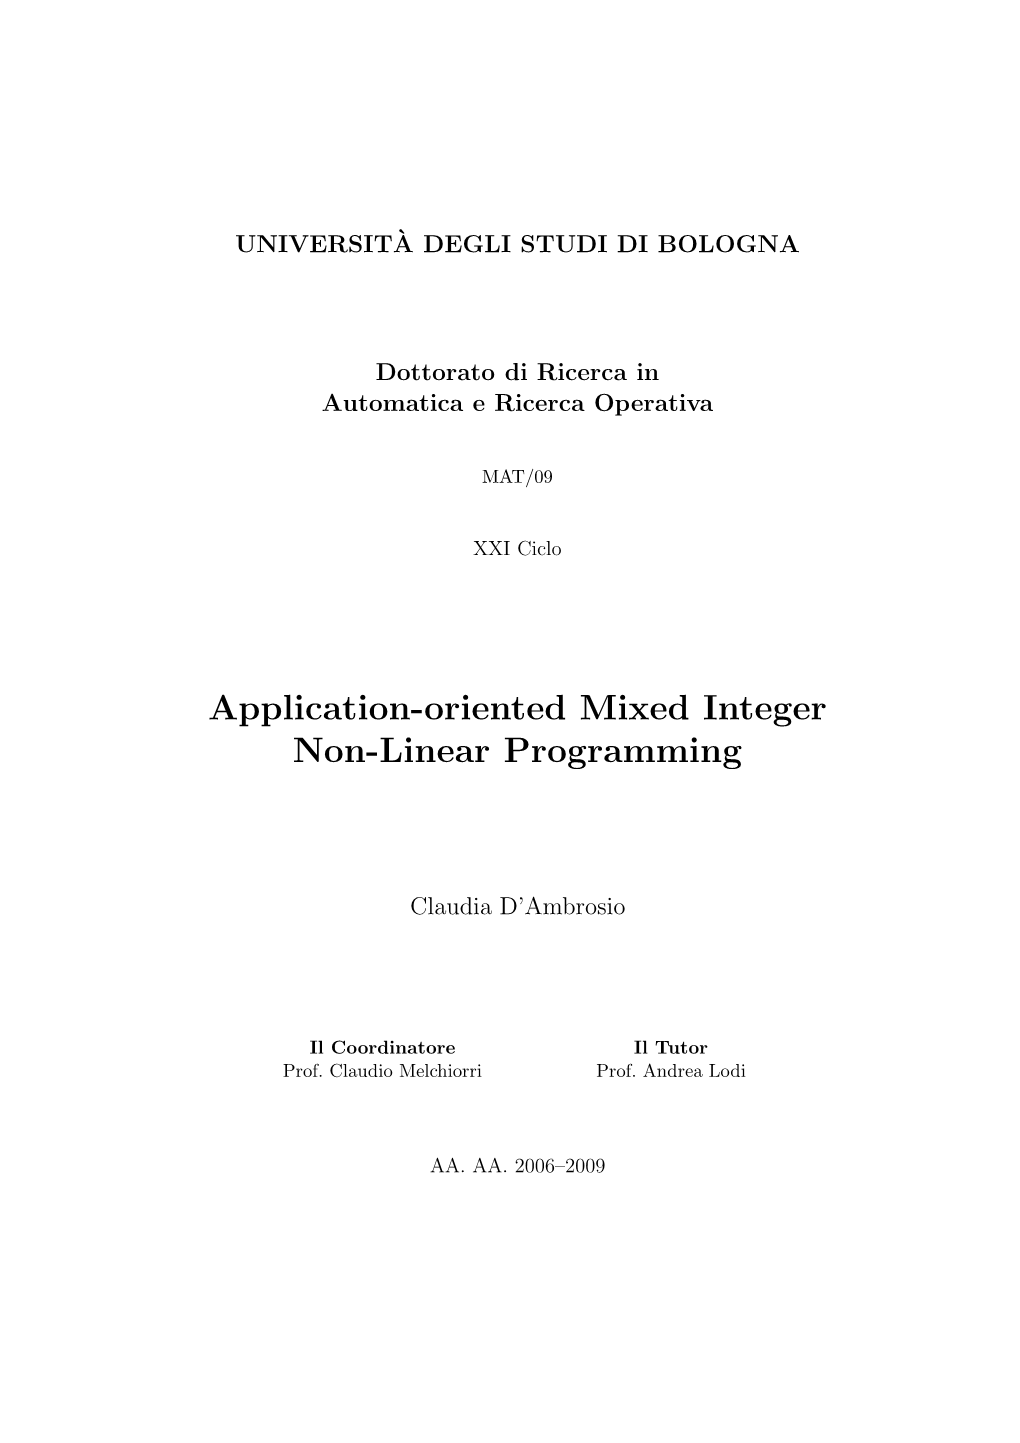 Application-Oriented Mixed Integer Non-Linear Programming